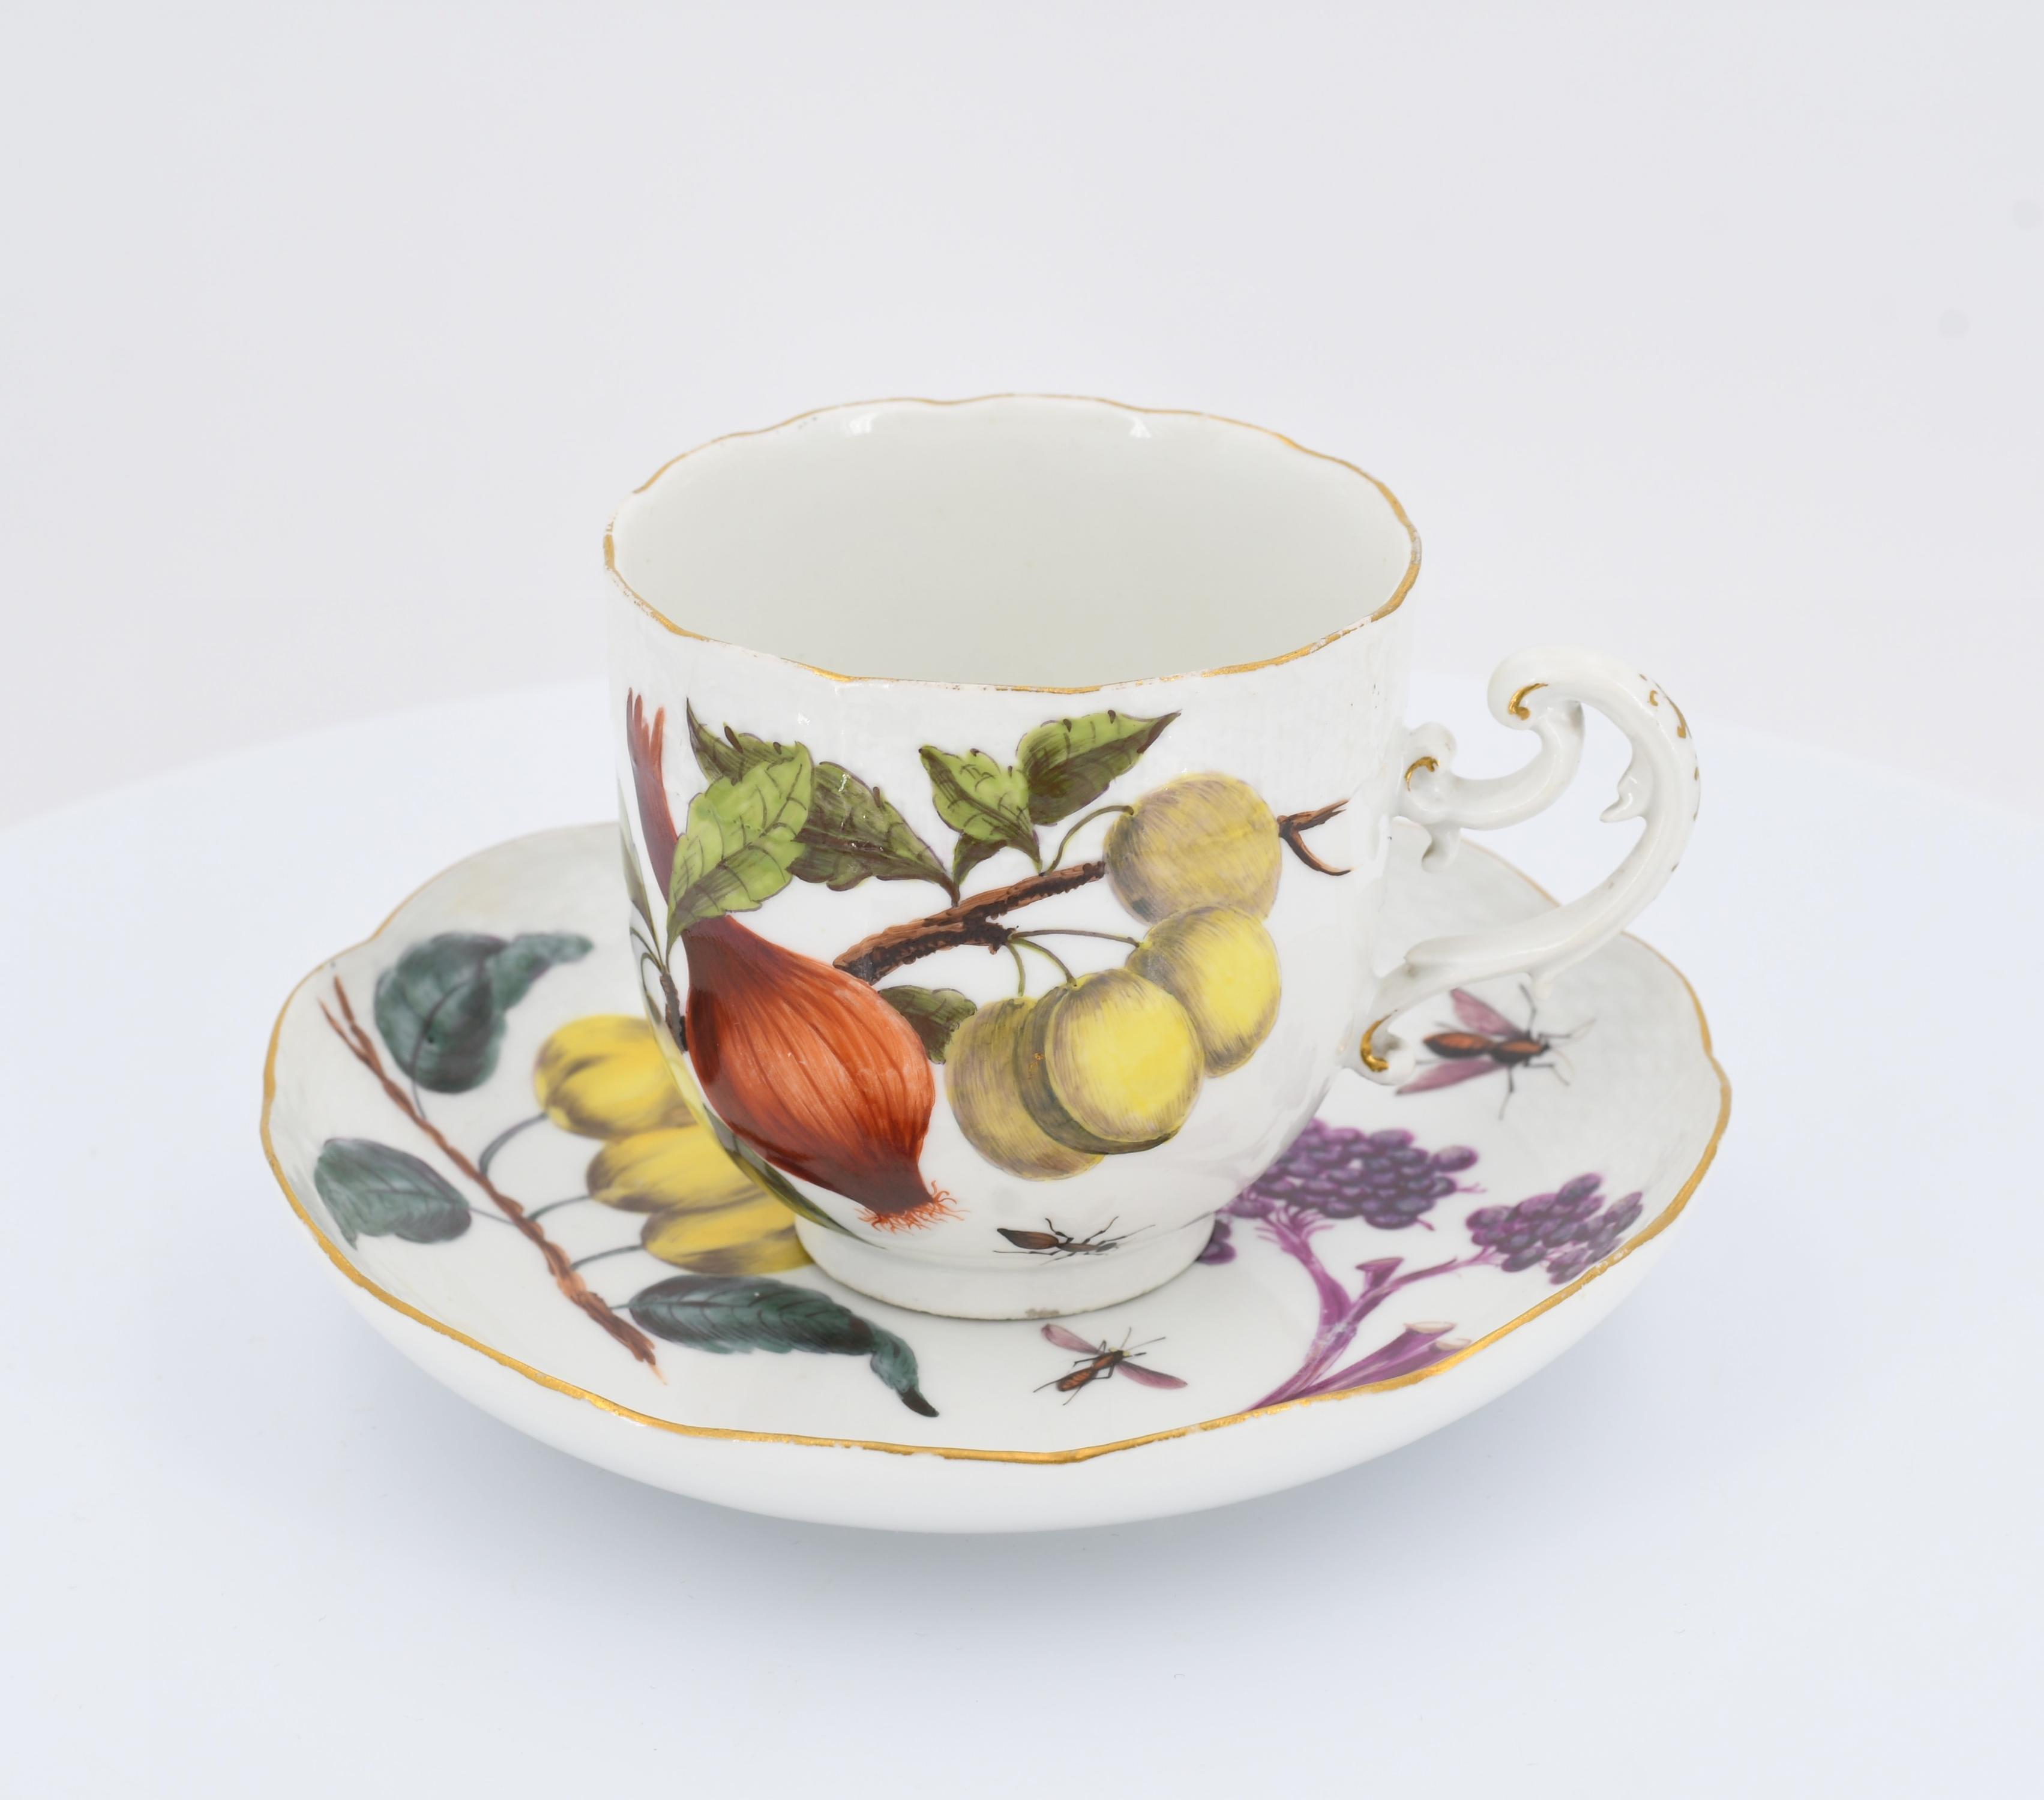 Cup and saucer with fruits and insects - Image 2 of 7